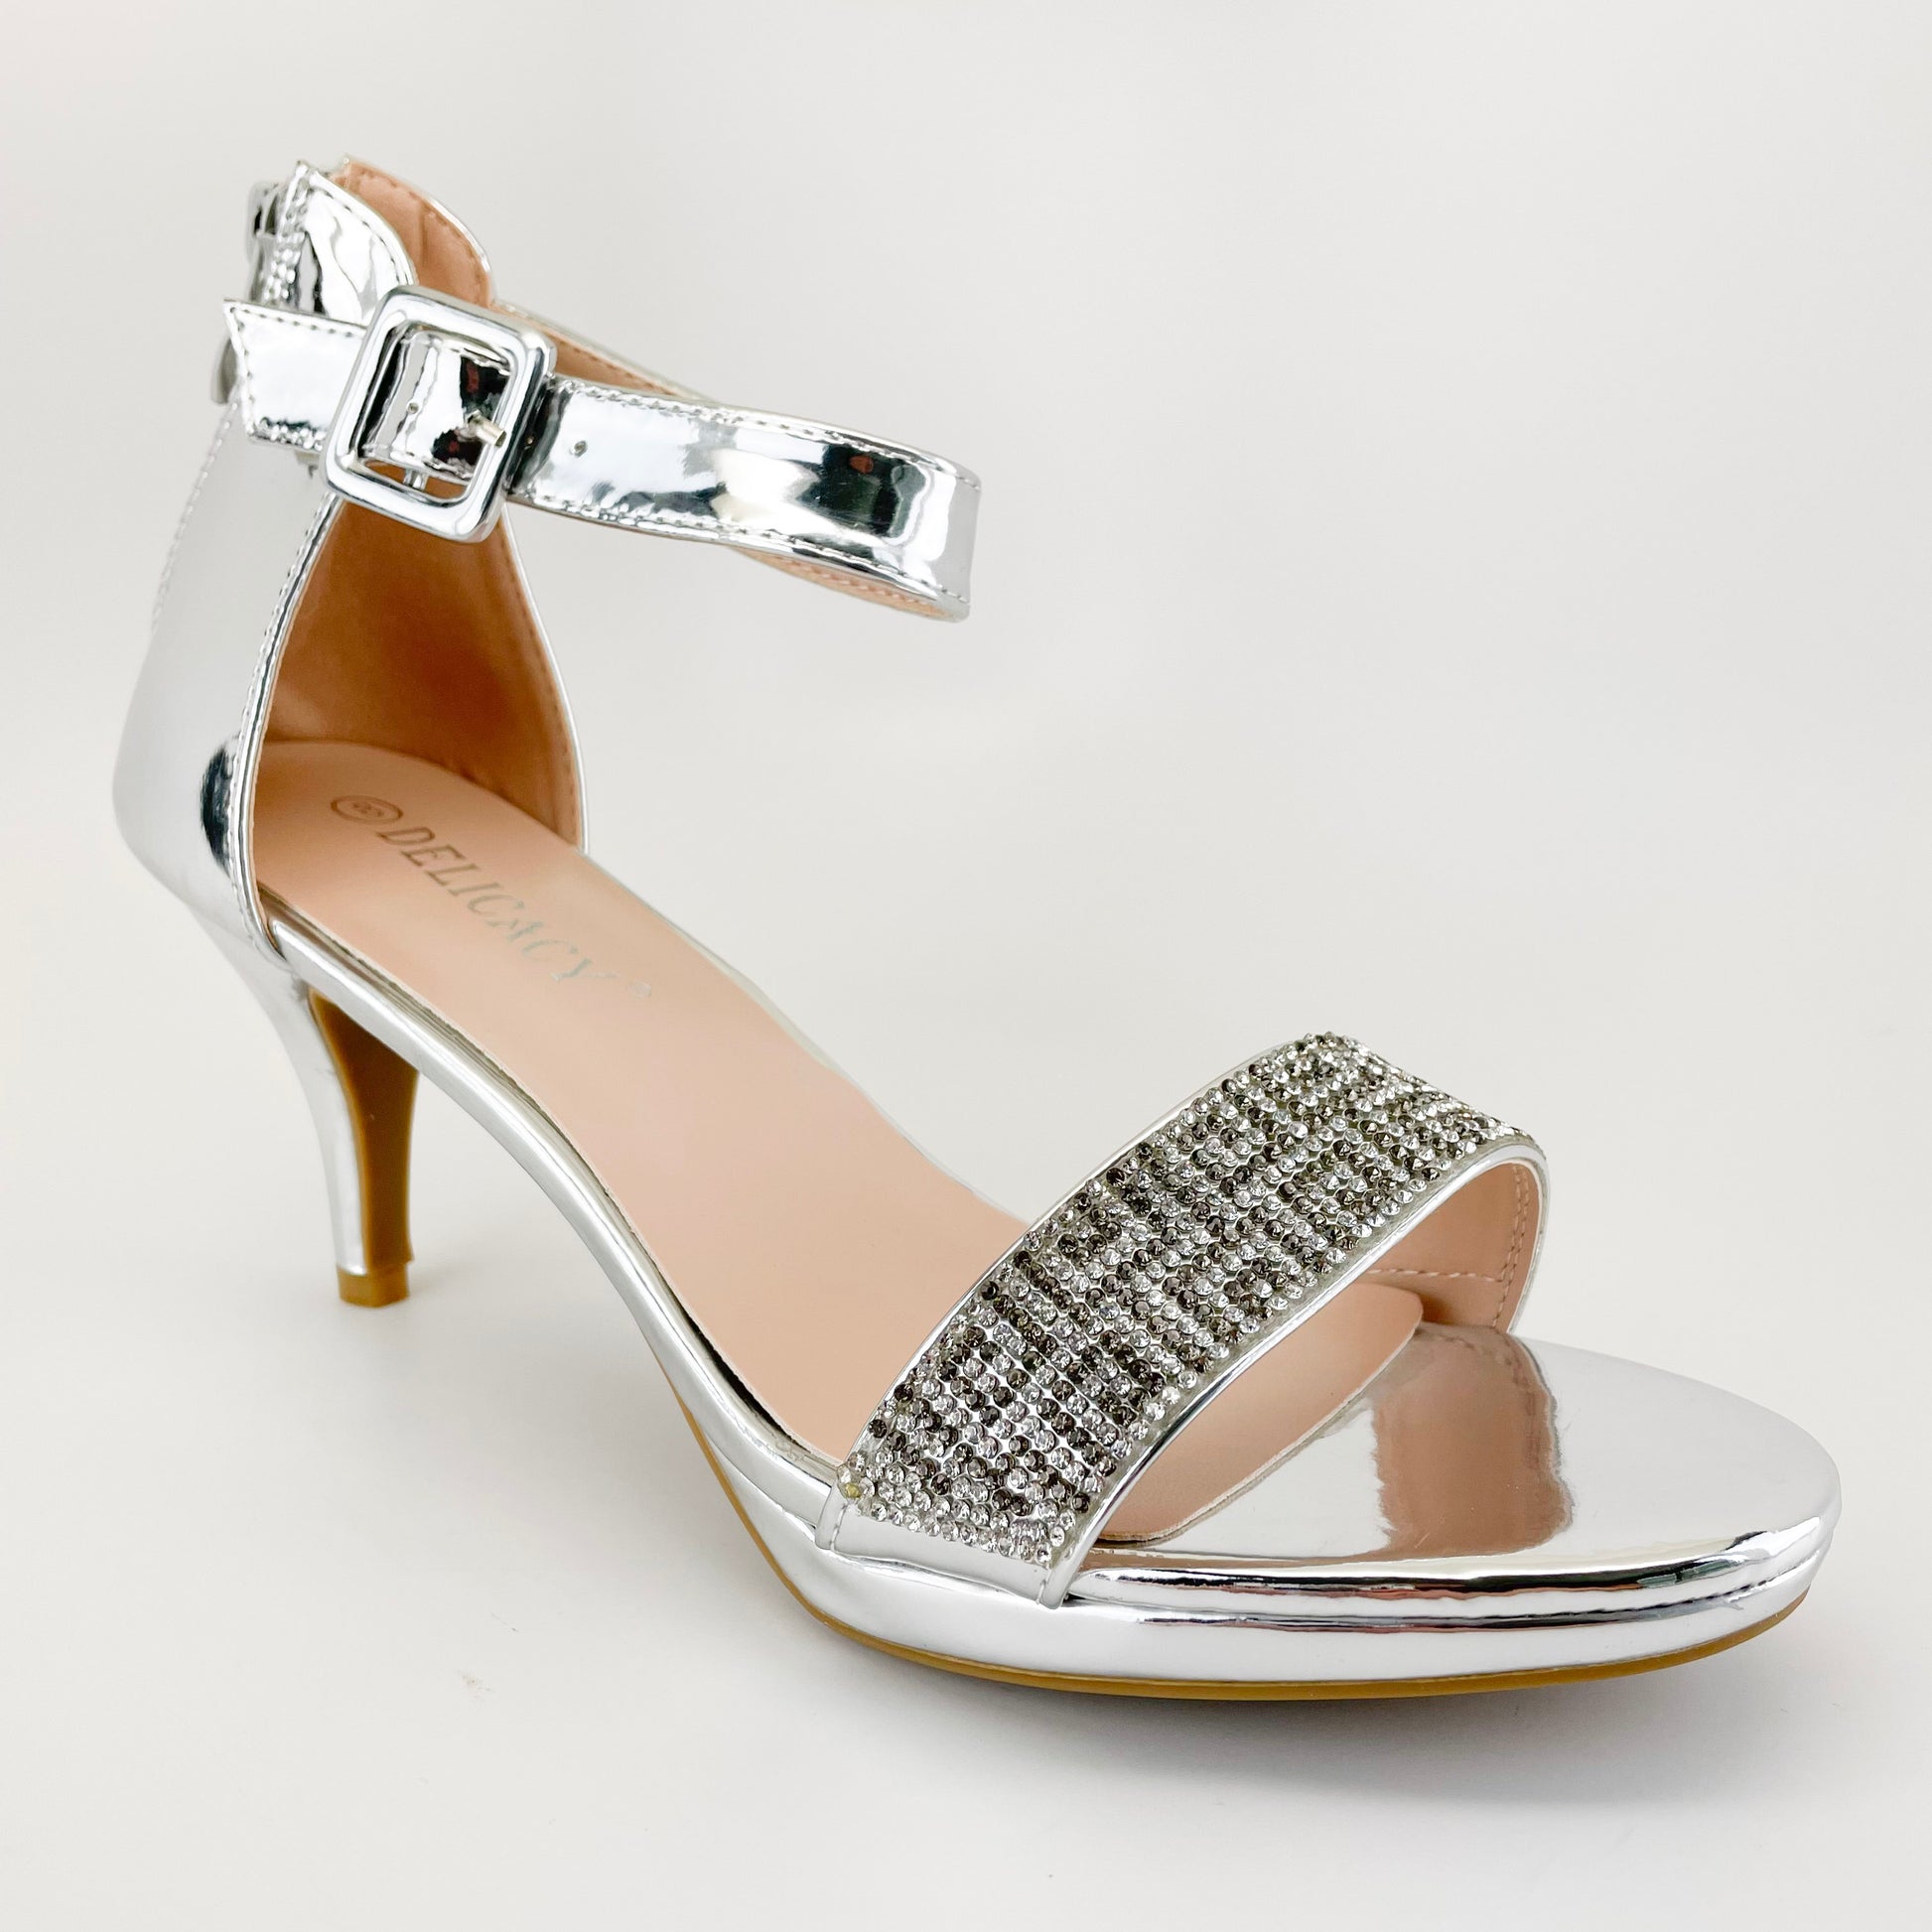 delicacy excited-105 silver pat heels with rhinestones